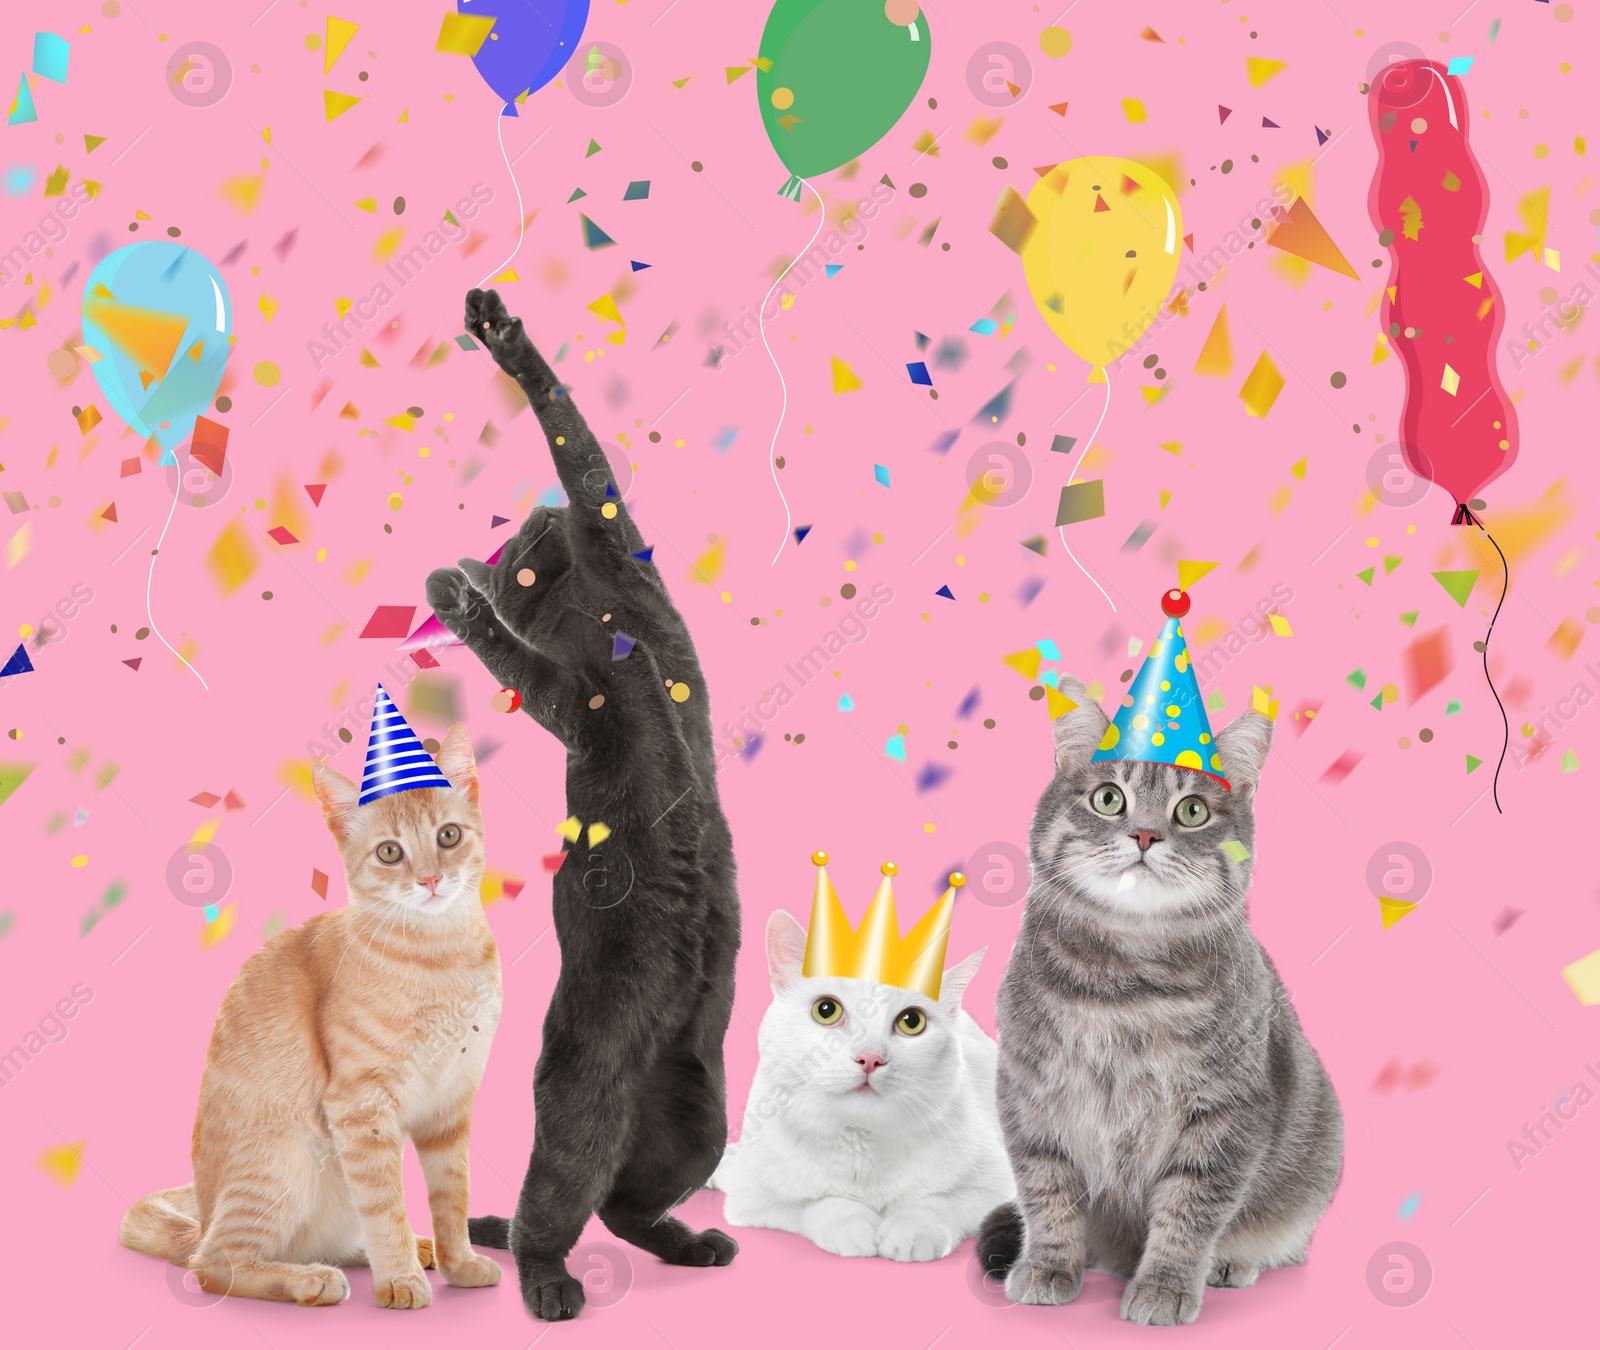 Image of Adorable cats with party hats on pink background